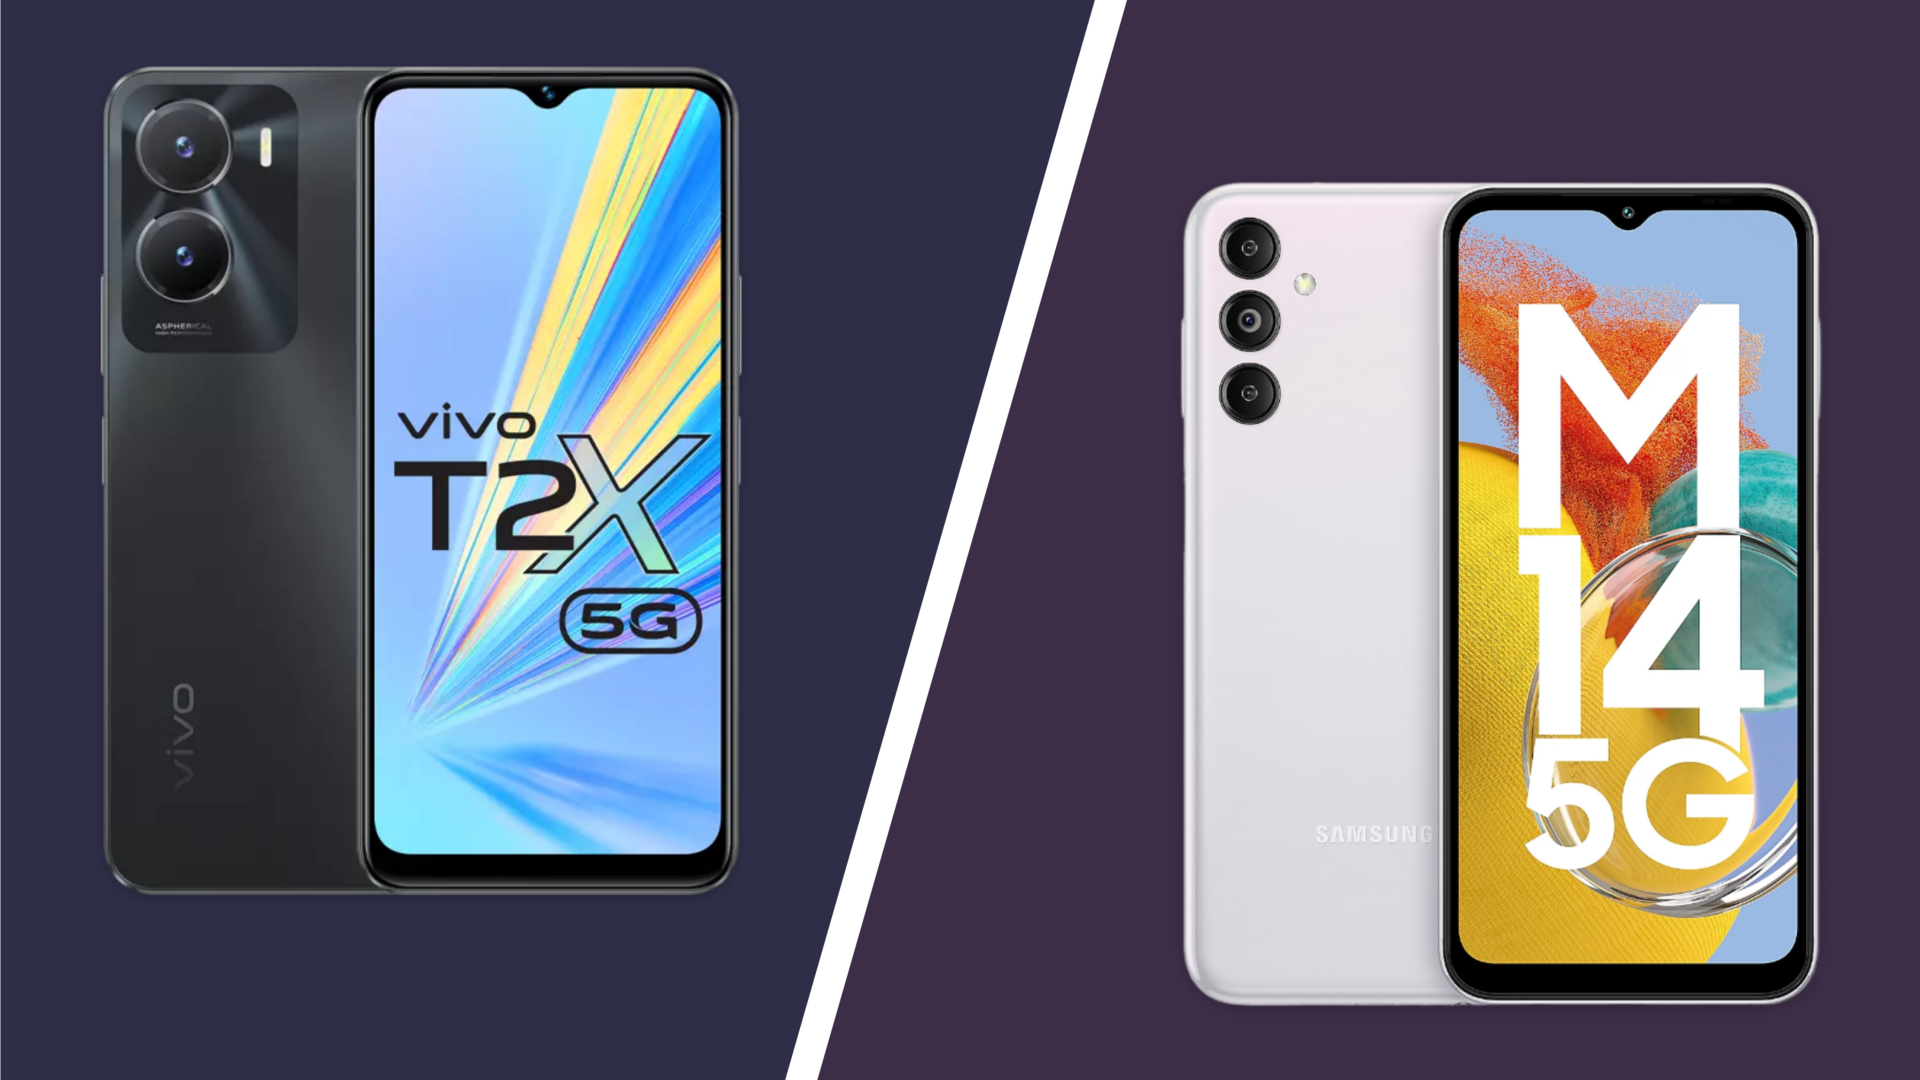 Vivo T2x v/s Samsung Galaxy M14: Which phone is better